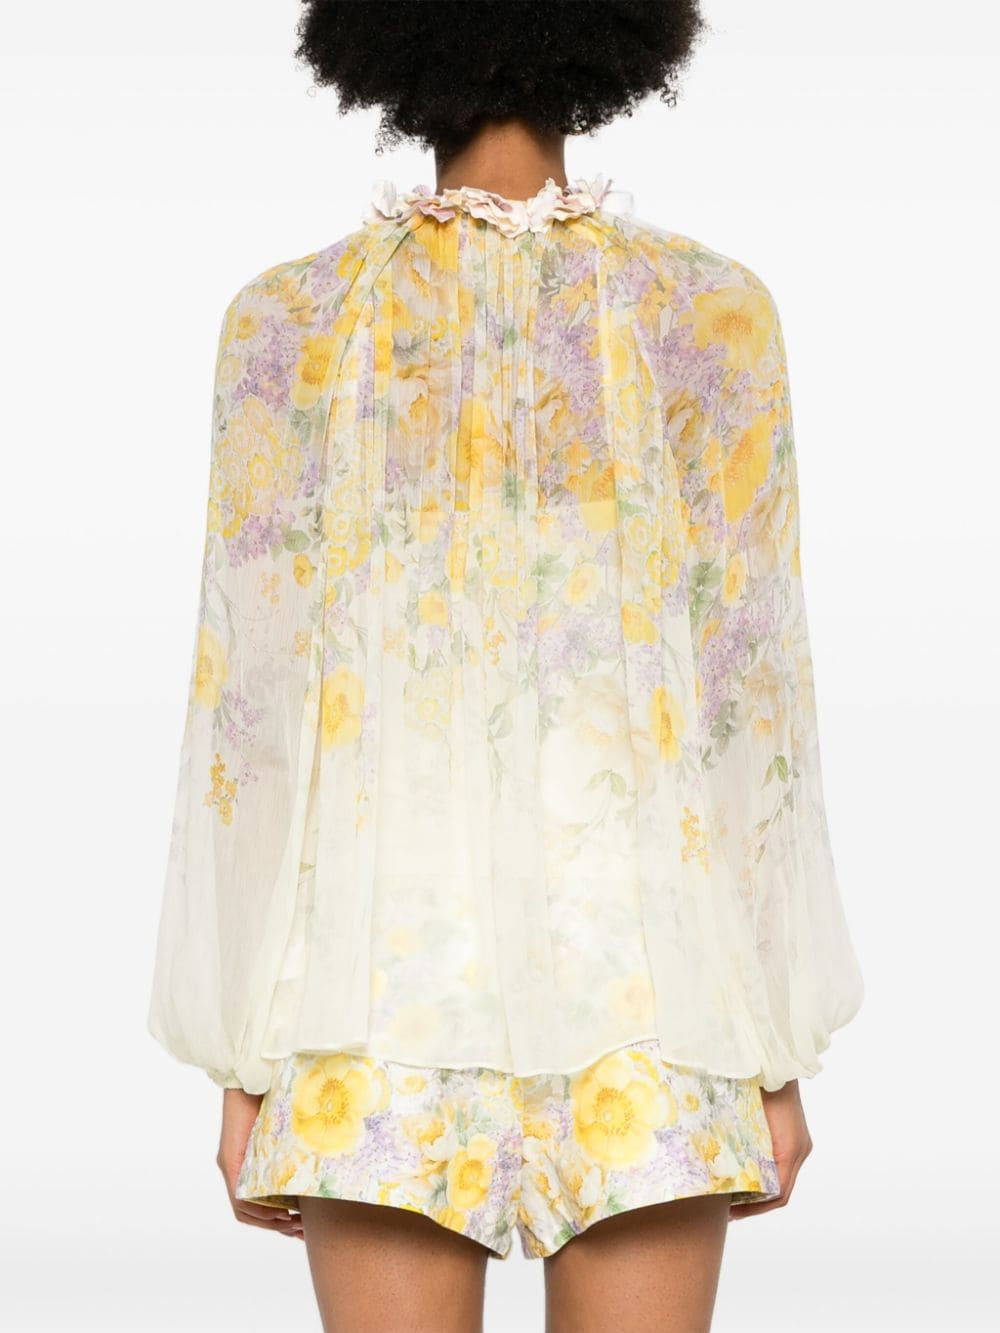 Harmony Billow floral blouse